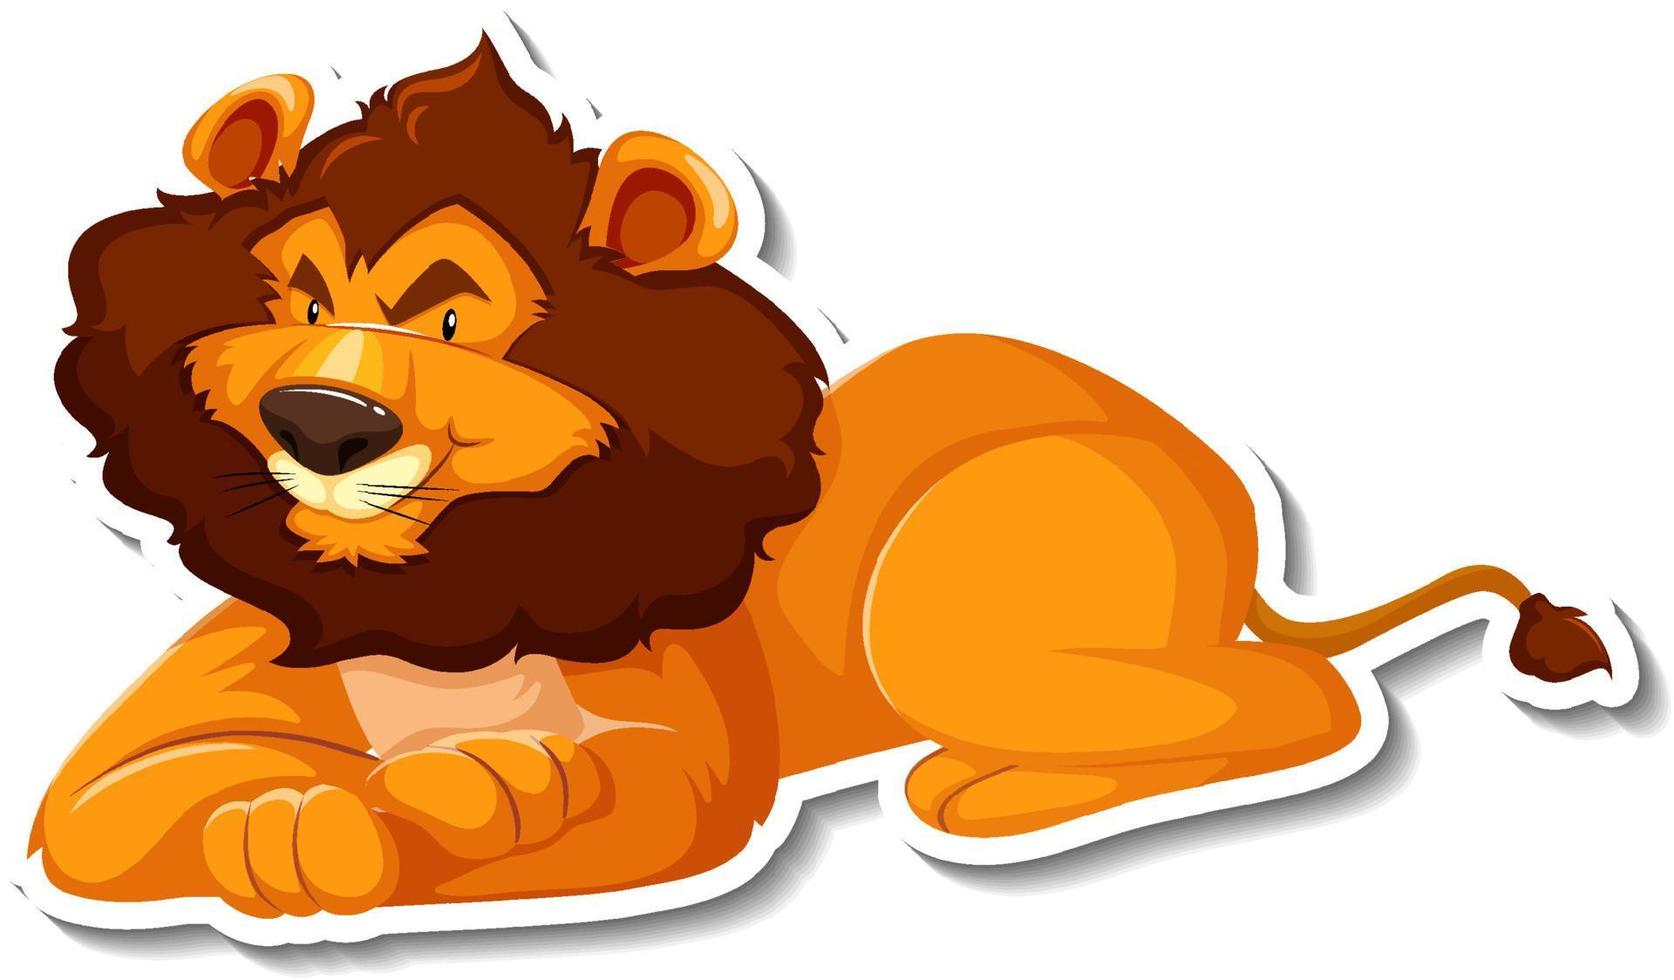 Lion lying cartoon character on white background vector